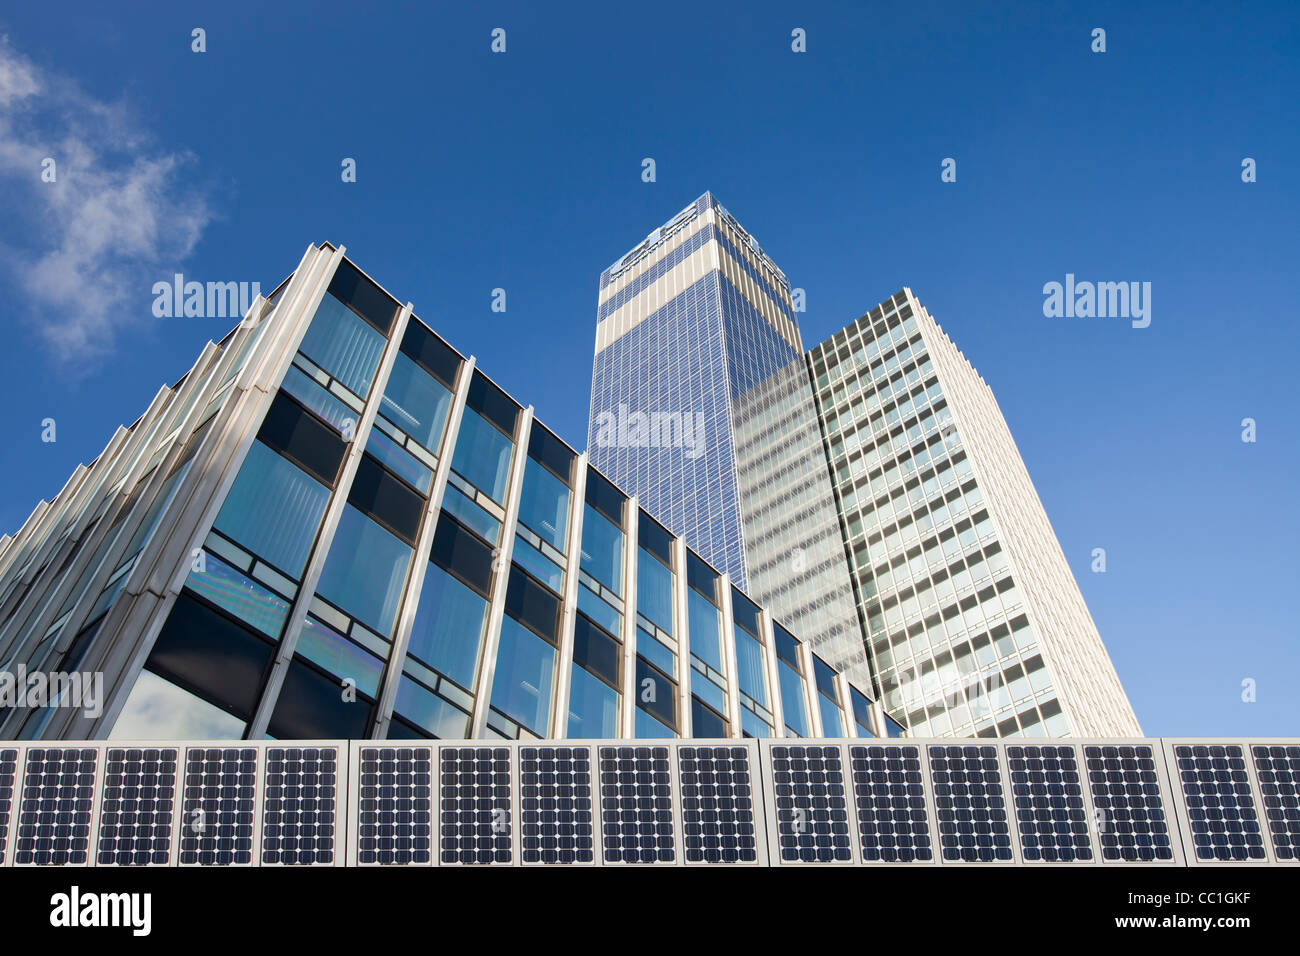 The Cooperative CIS Tower in manchester, UK. The tower has been covered in 7000 Solar panels Stock Photo